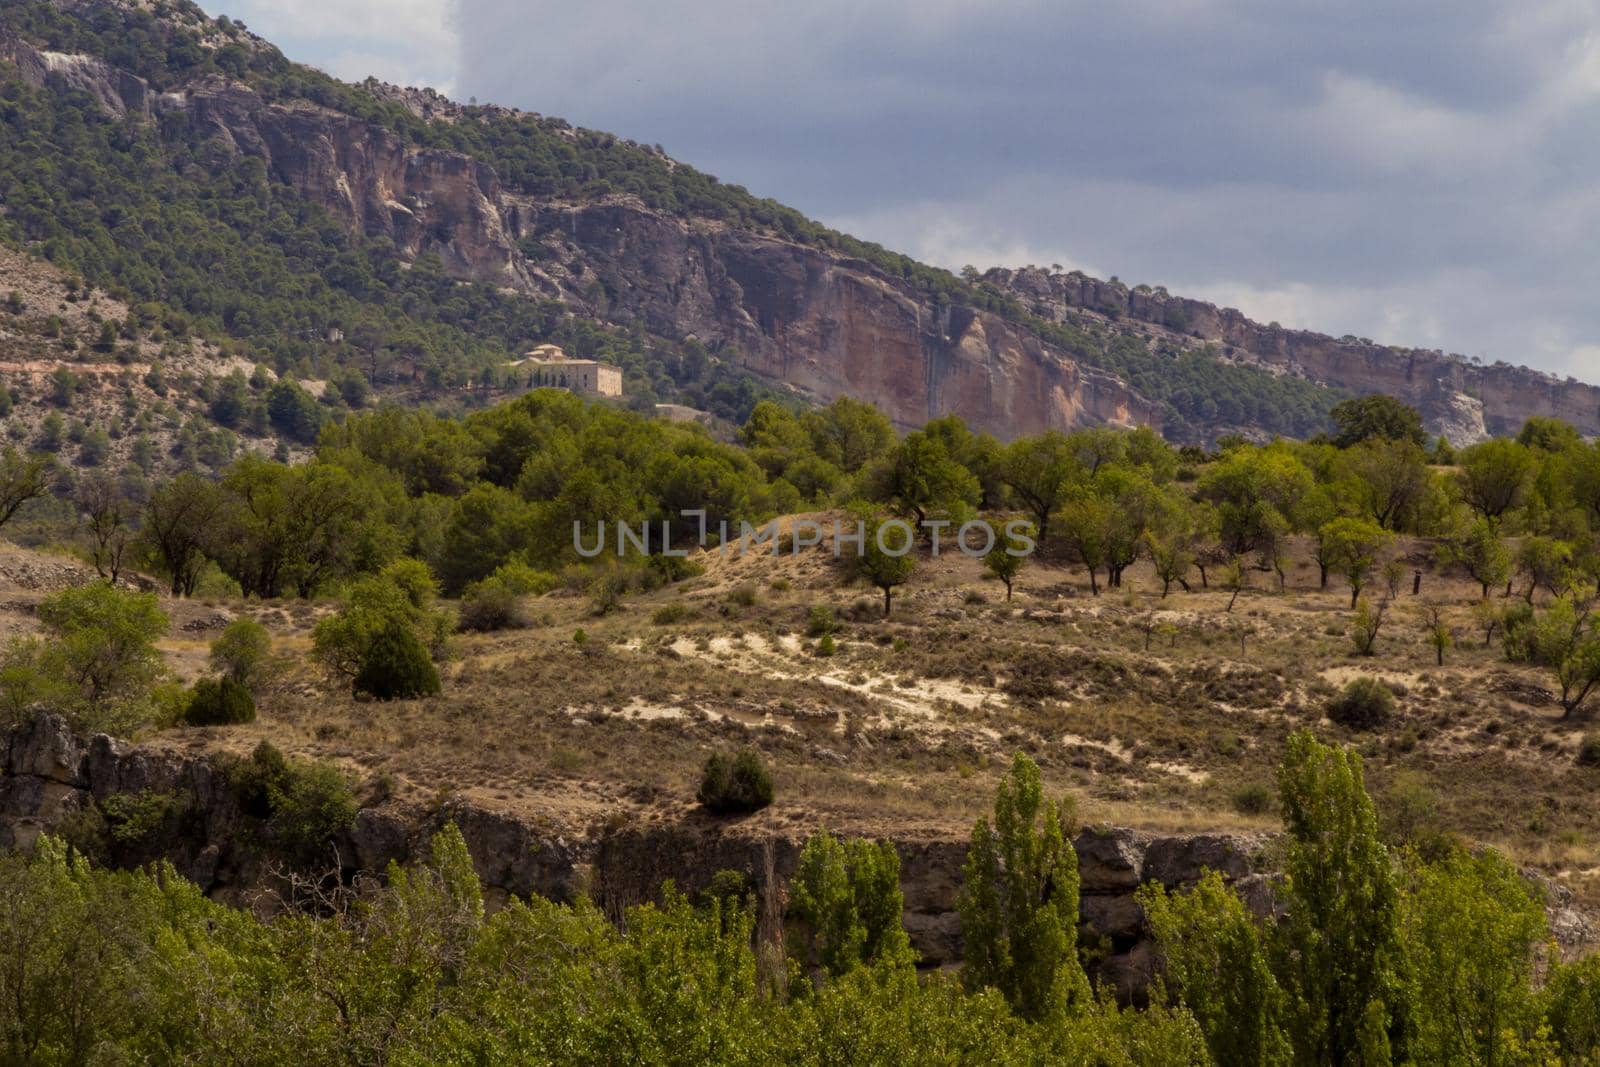 Wide-shot of a mountain range coverd by pines with a monastery in the slope